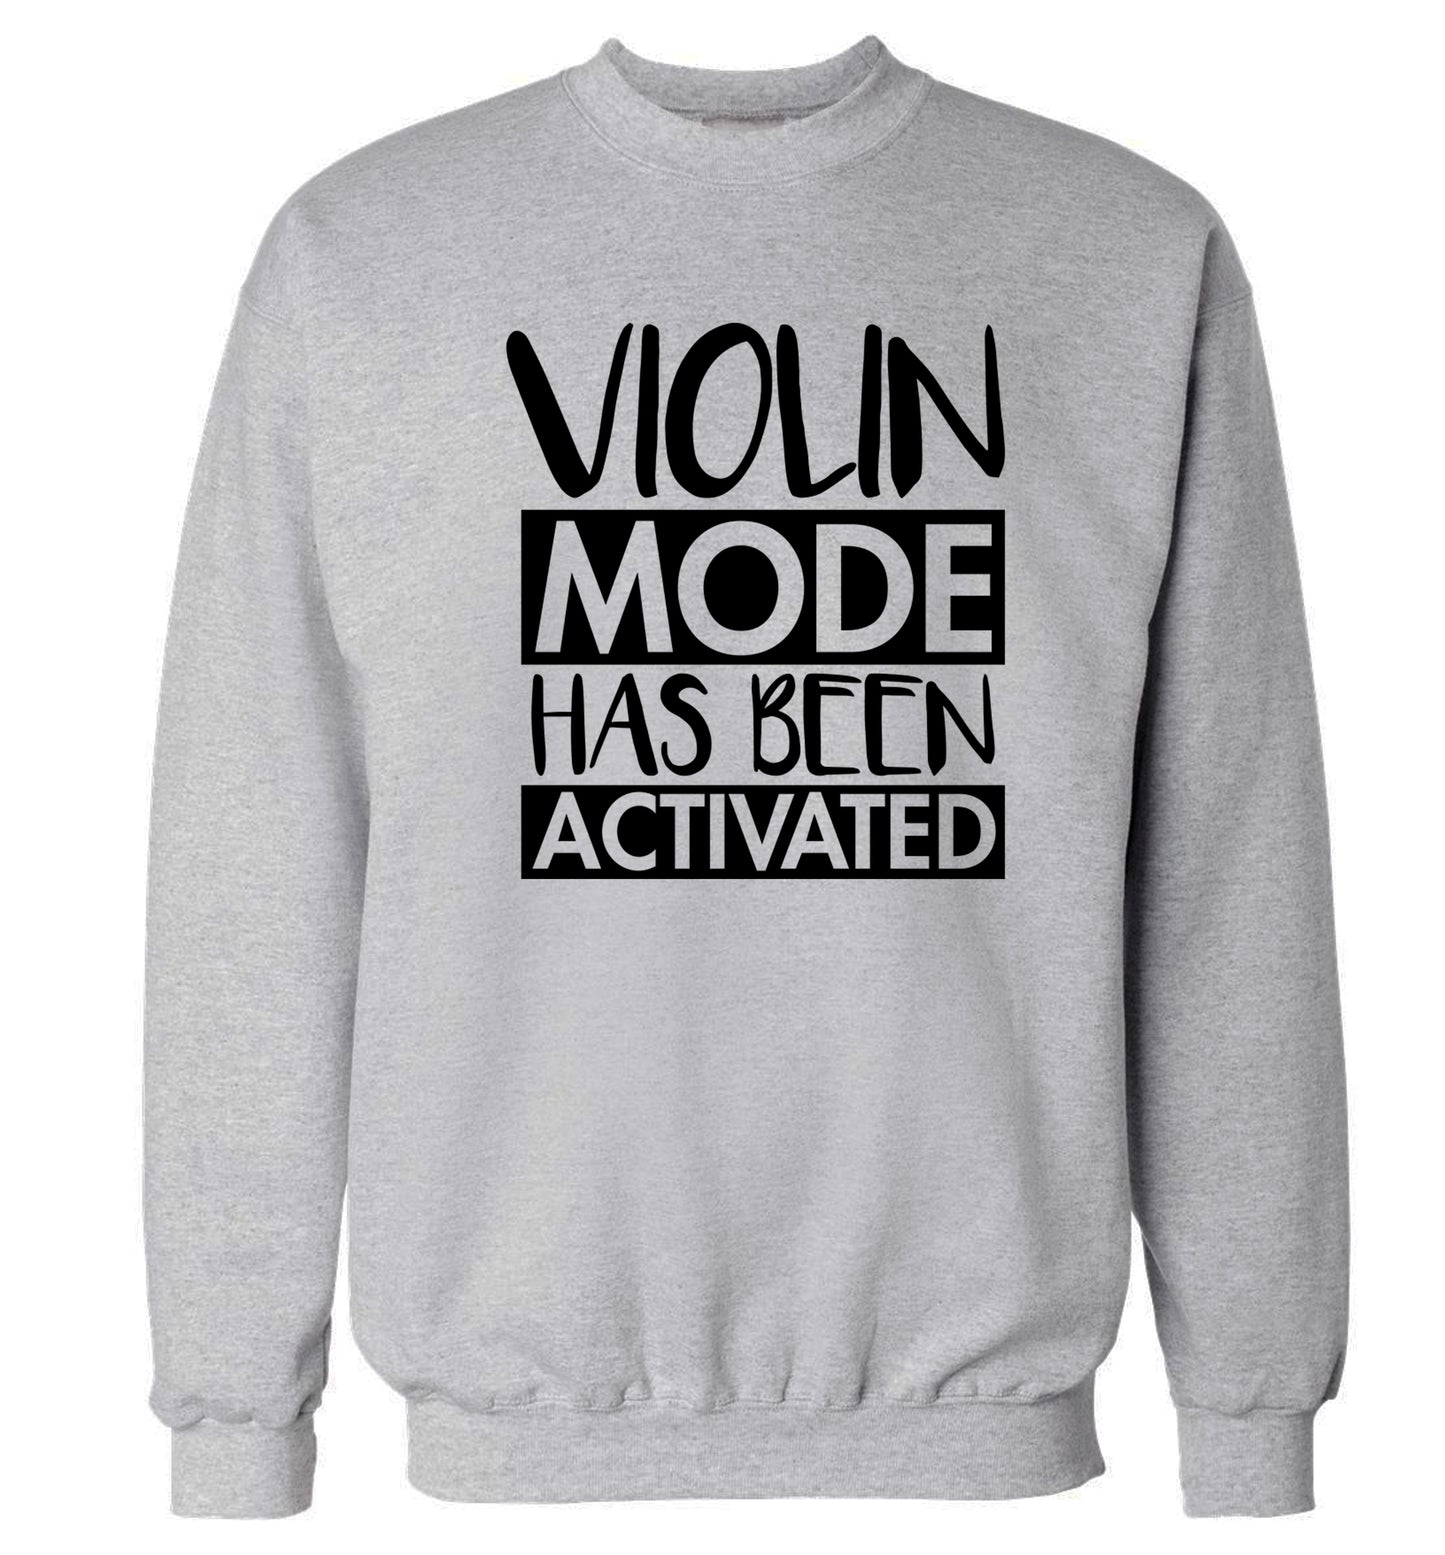 Violin Mode Activated Adult's unisex grey Sweater 2XL